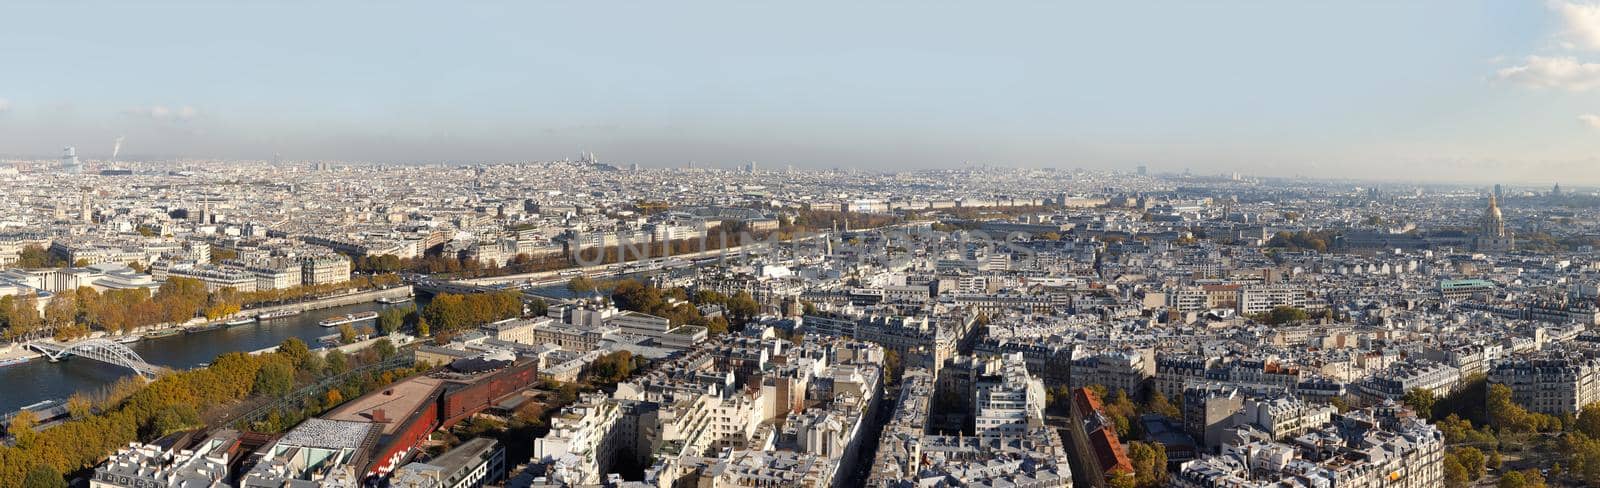 Cityscape of Paris City. Aerial panoramic view of Paris roofs and Seine river as seen from Eiffel Tower in autumn time